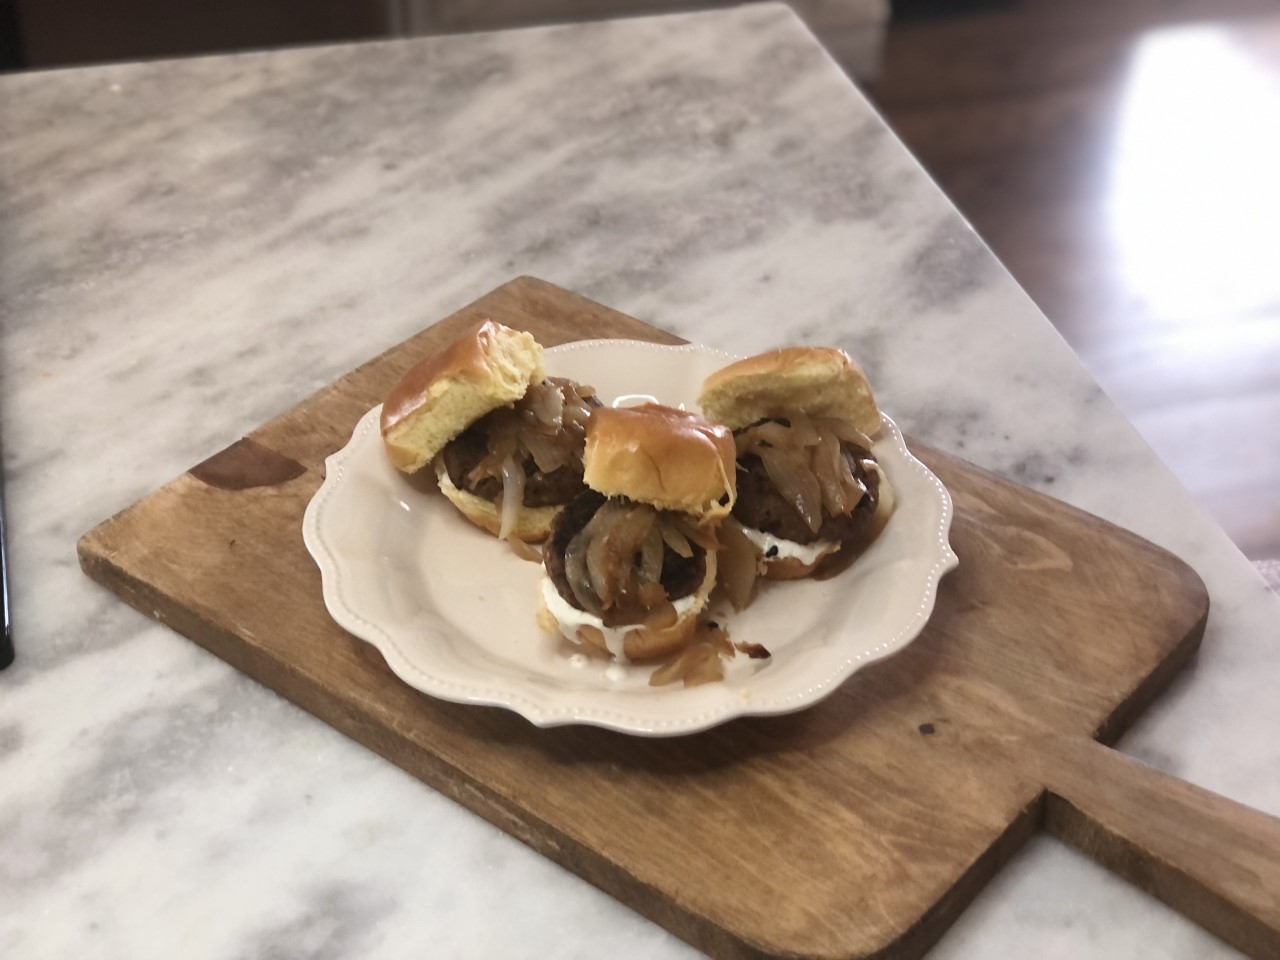 Three deer sliders with caramelized onions and aioli on a white plate placed on a wood cutting board. 